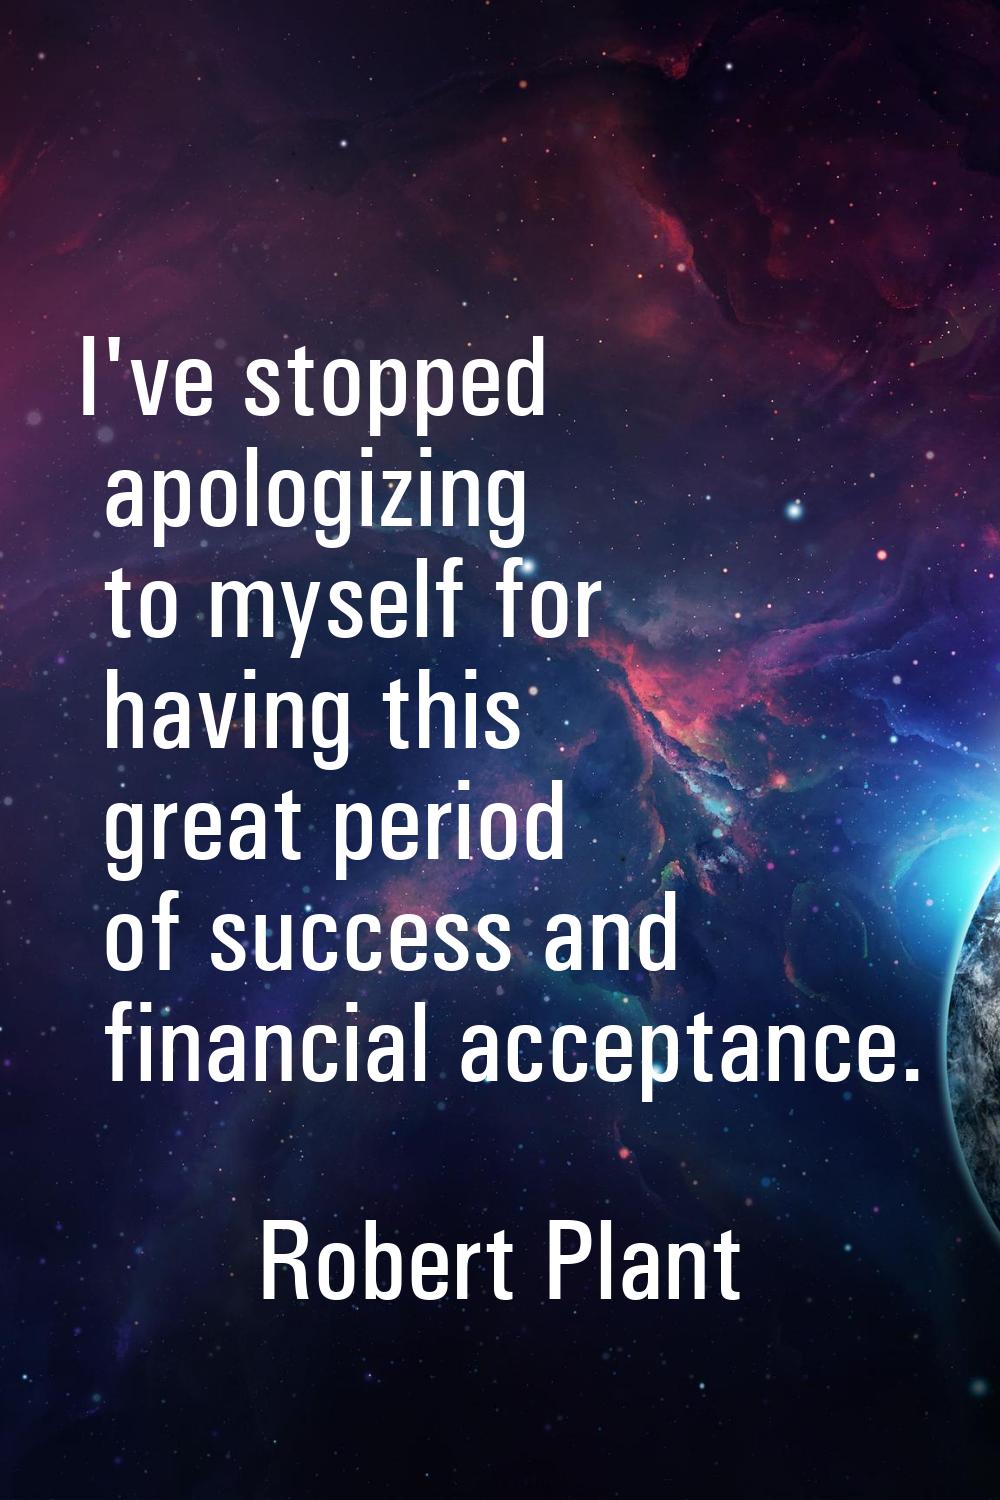 I've stopped apologizing to myself for having this great period of success and financial acceptance